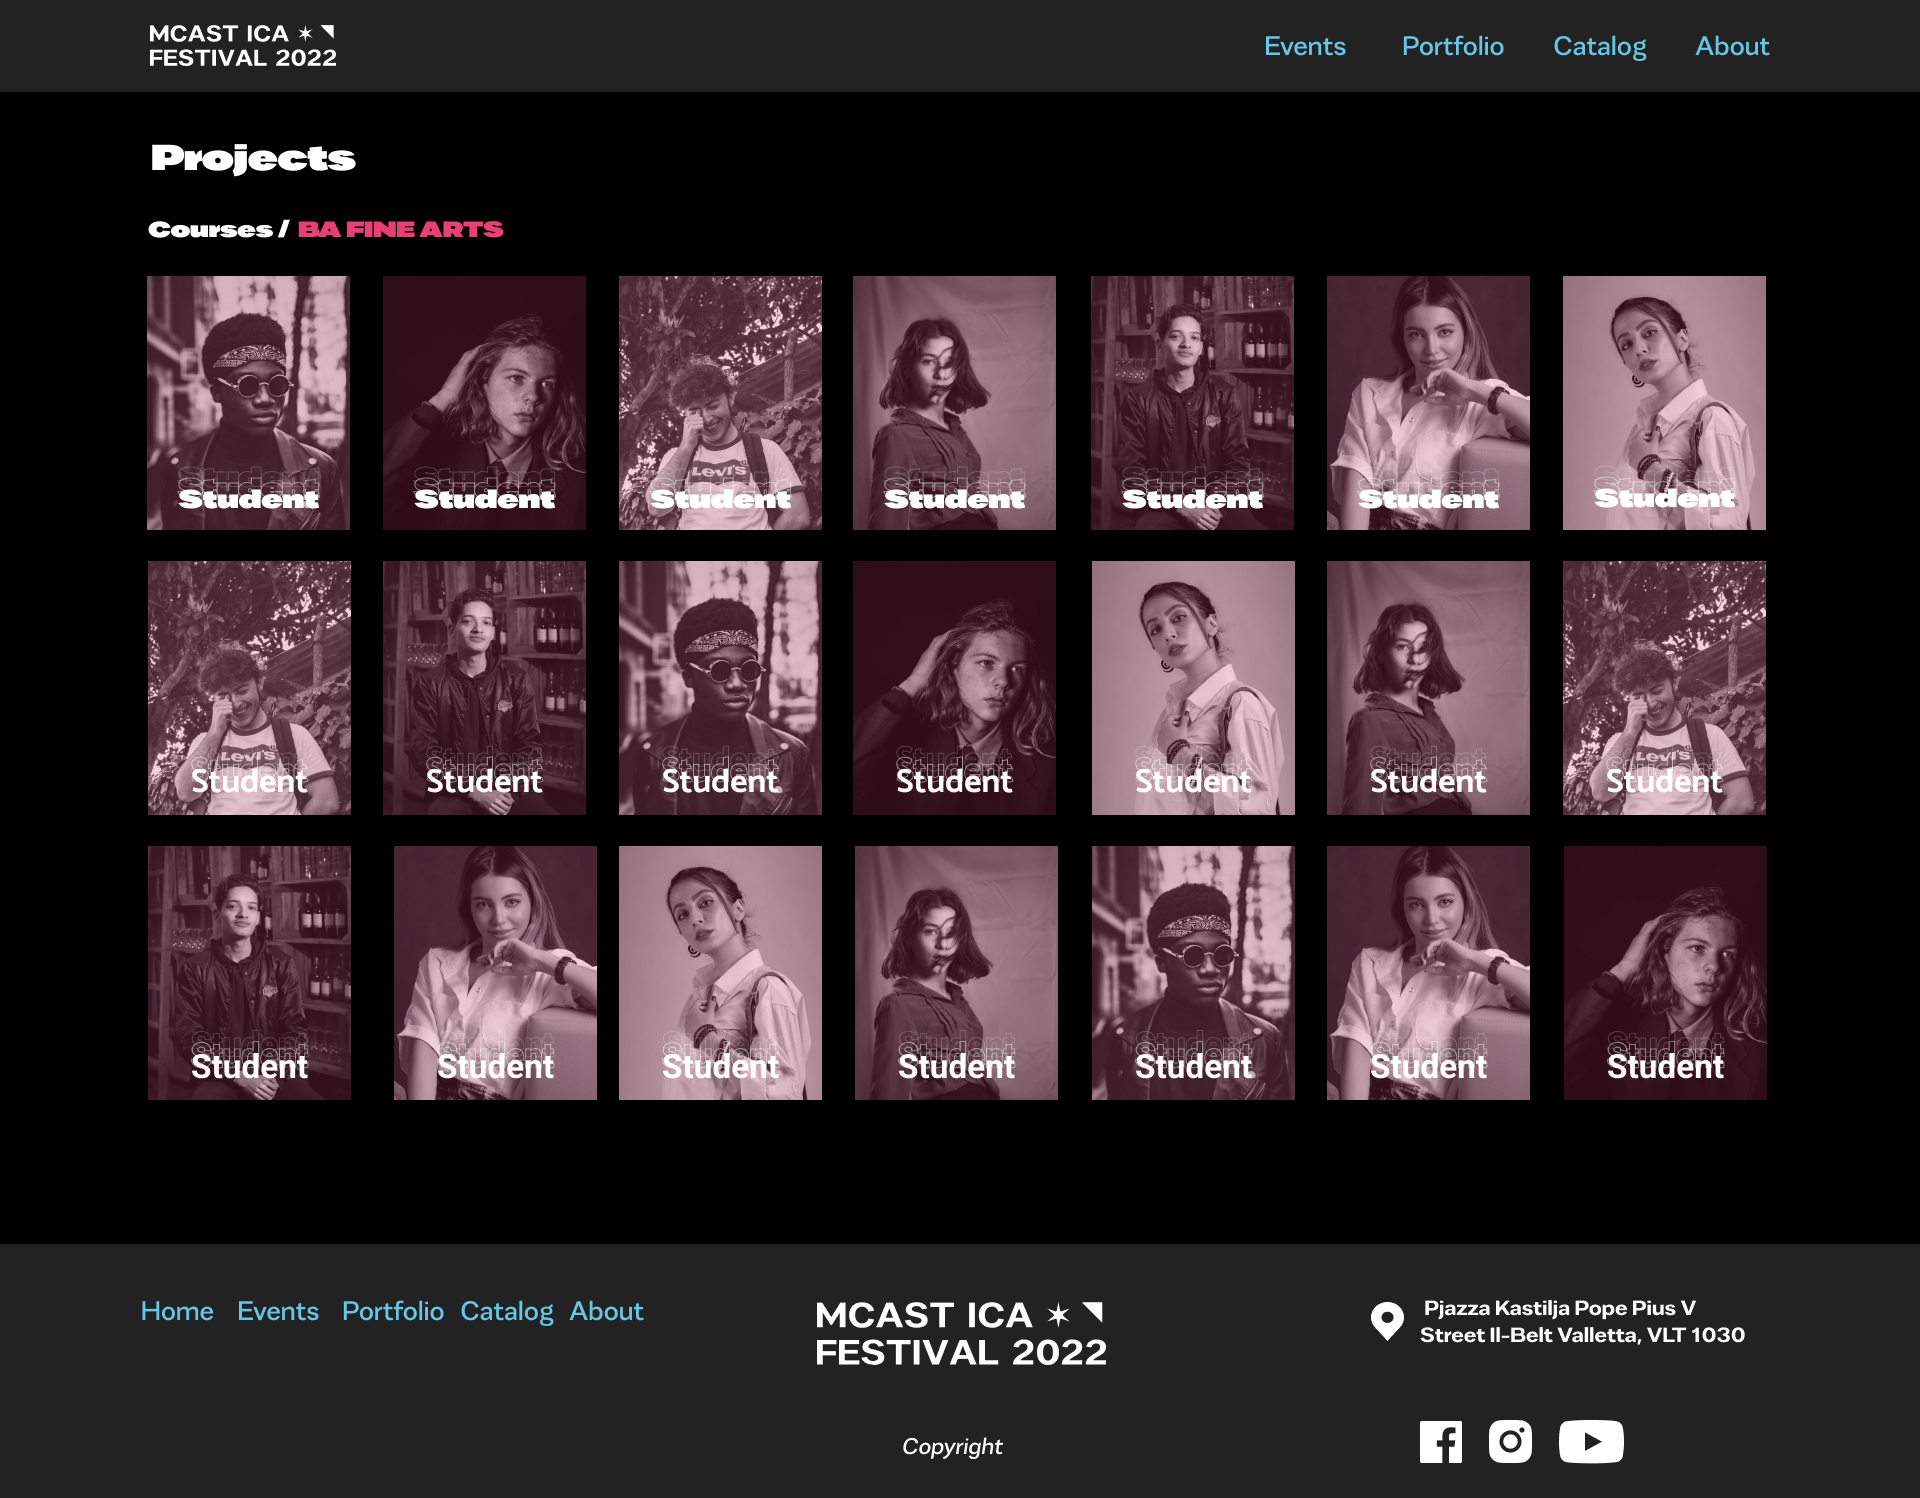 MCAST ICA Festival Projects page